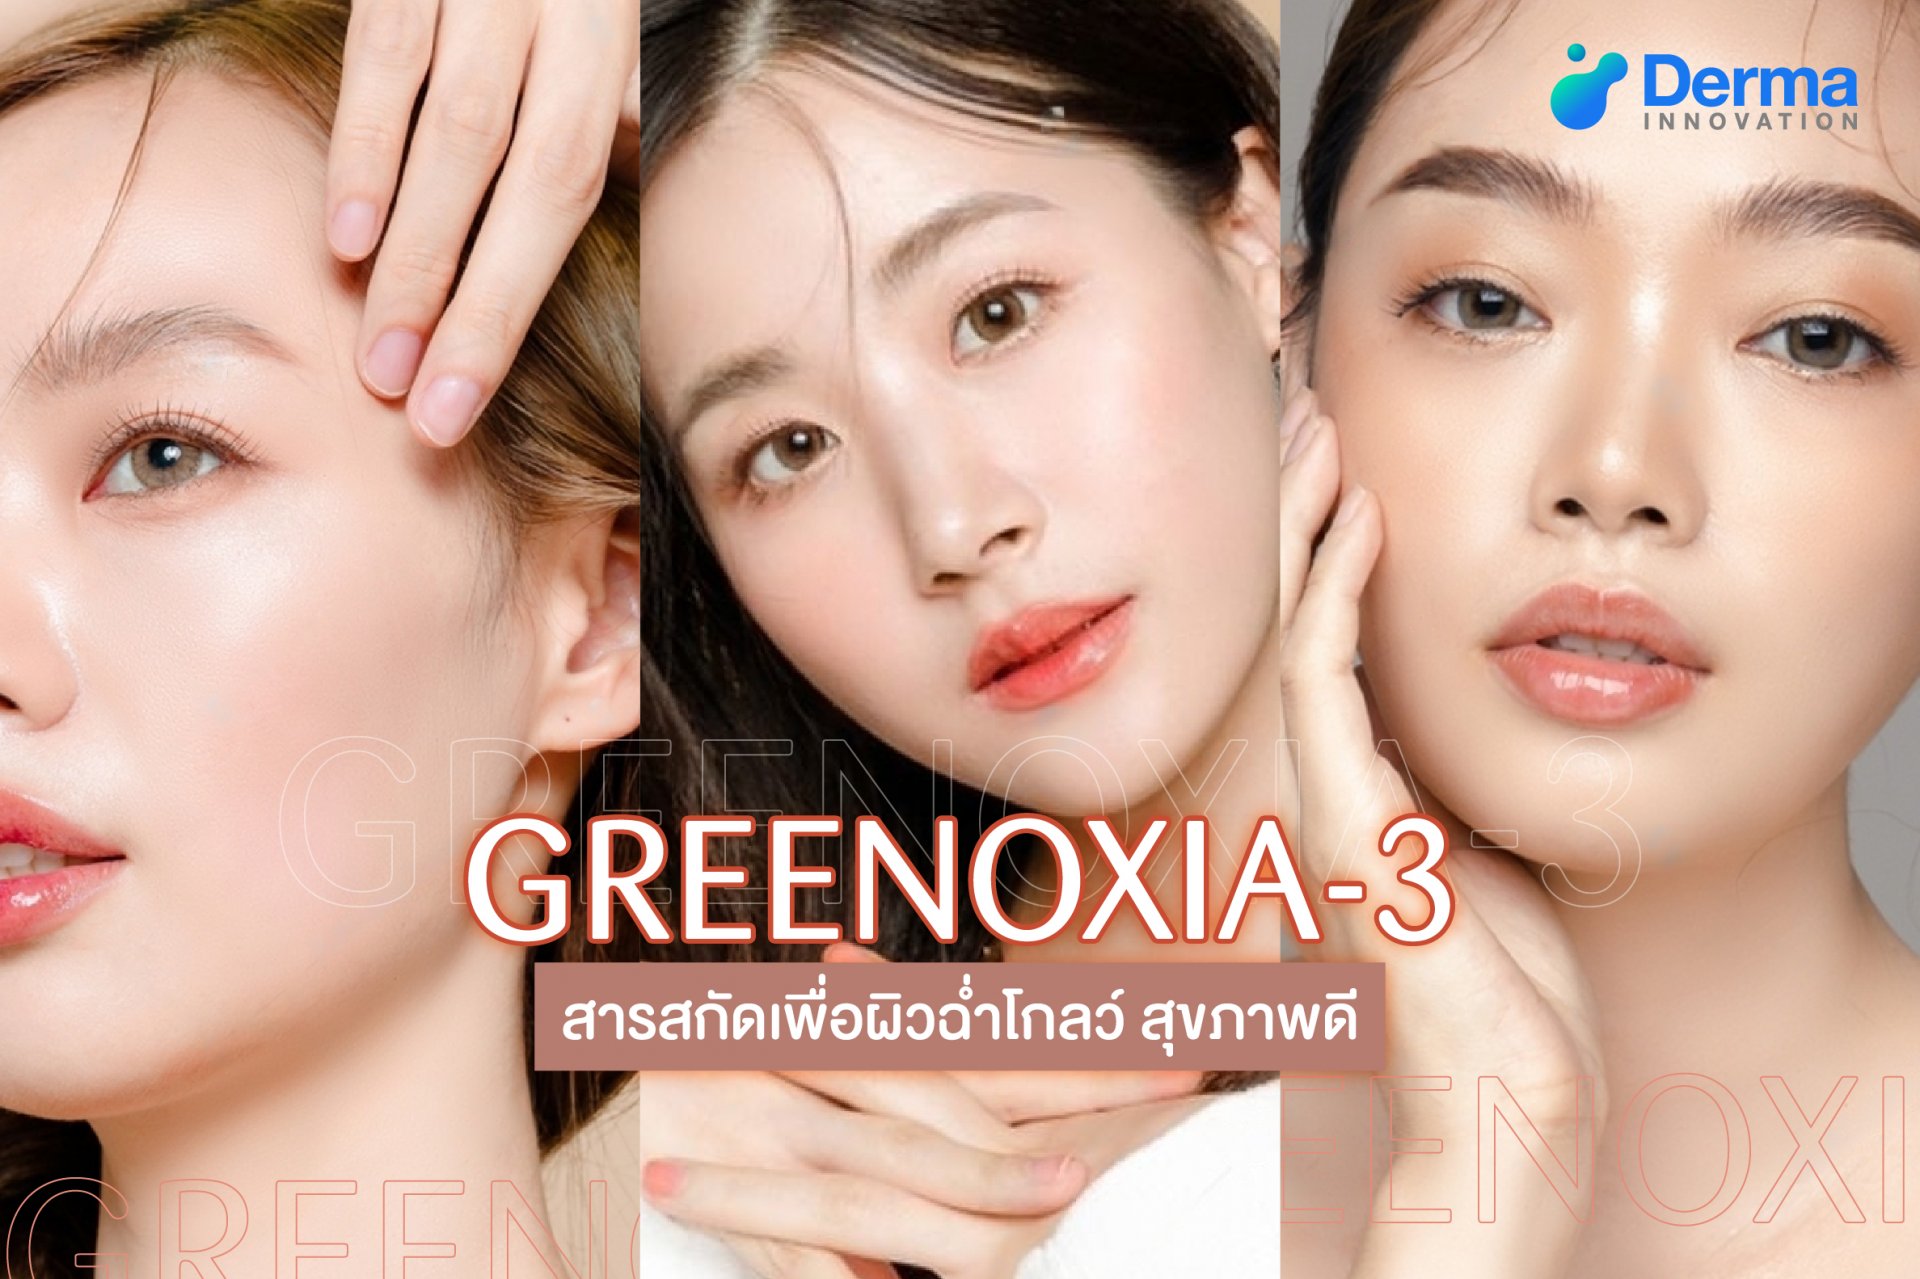 GREENOXIA-3 extract for glowing, healthy skin